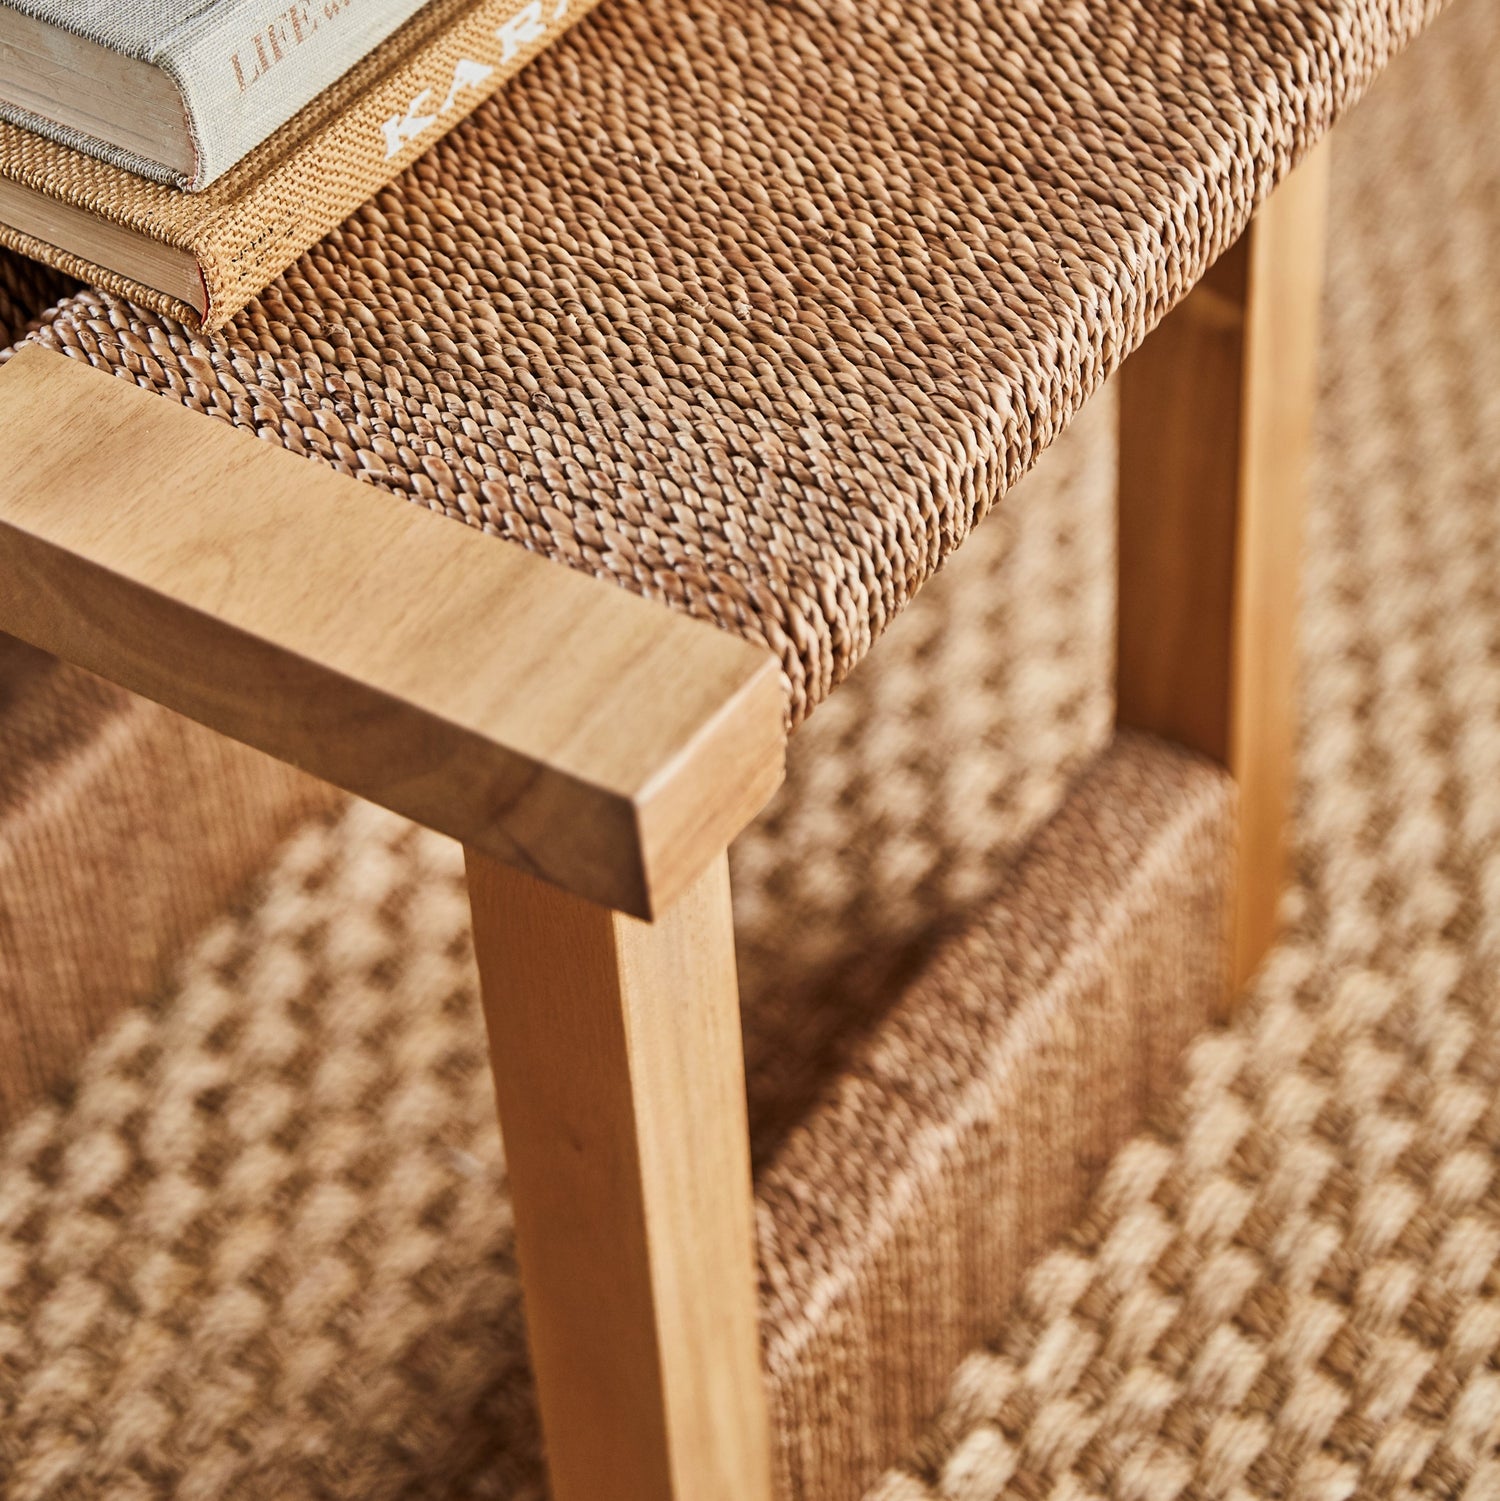 textura side table detail